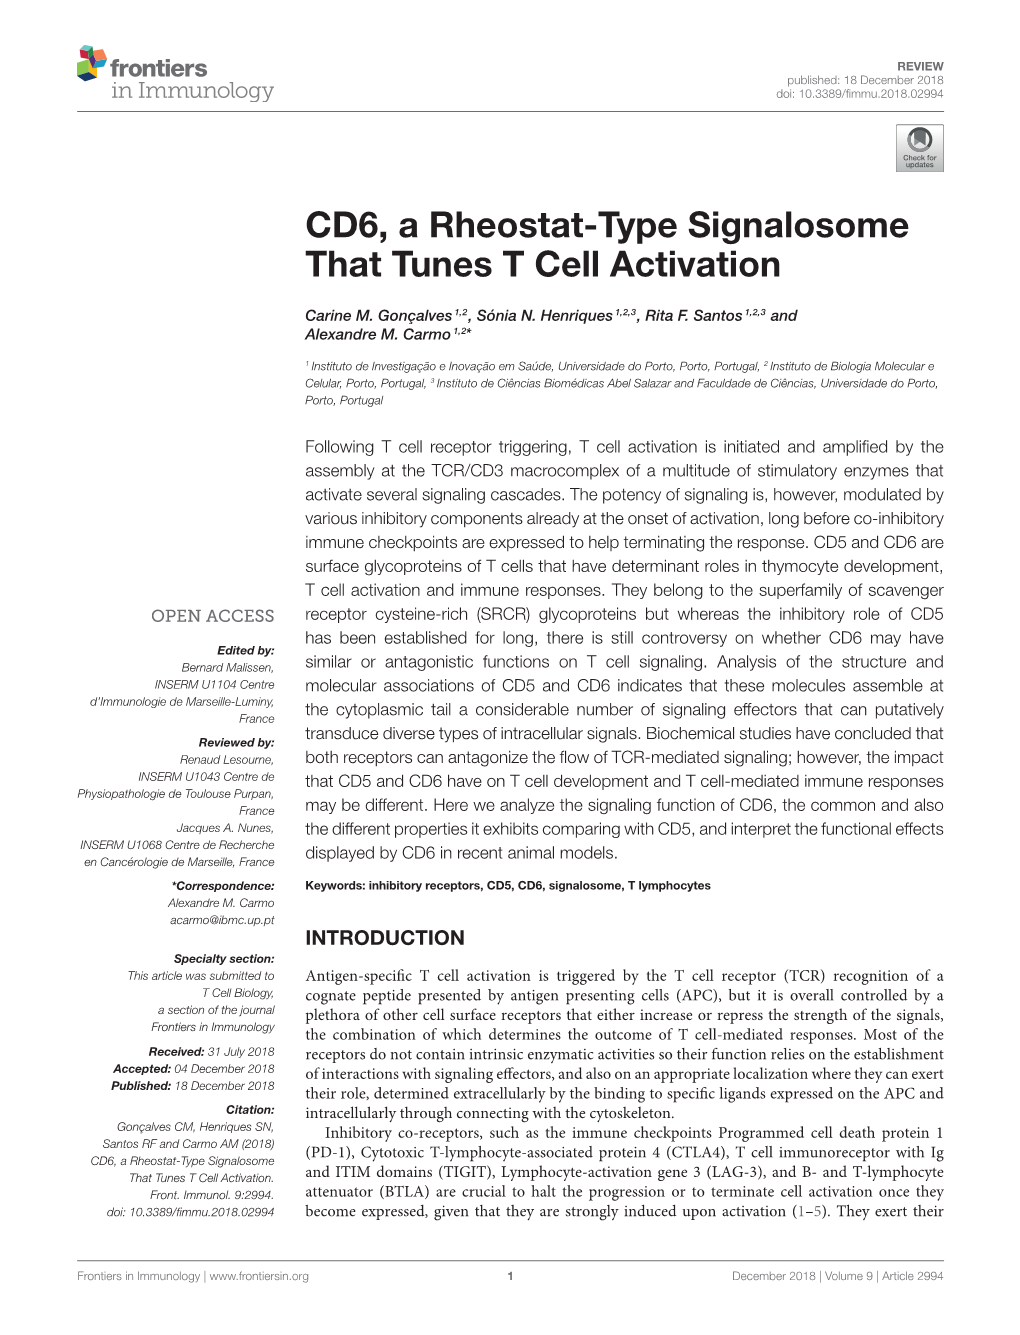 CD6, a Rheostat-Type Signalosome That Tunes T Cell Activation